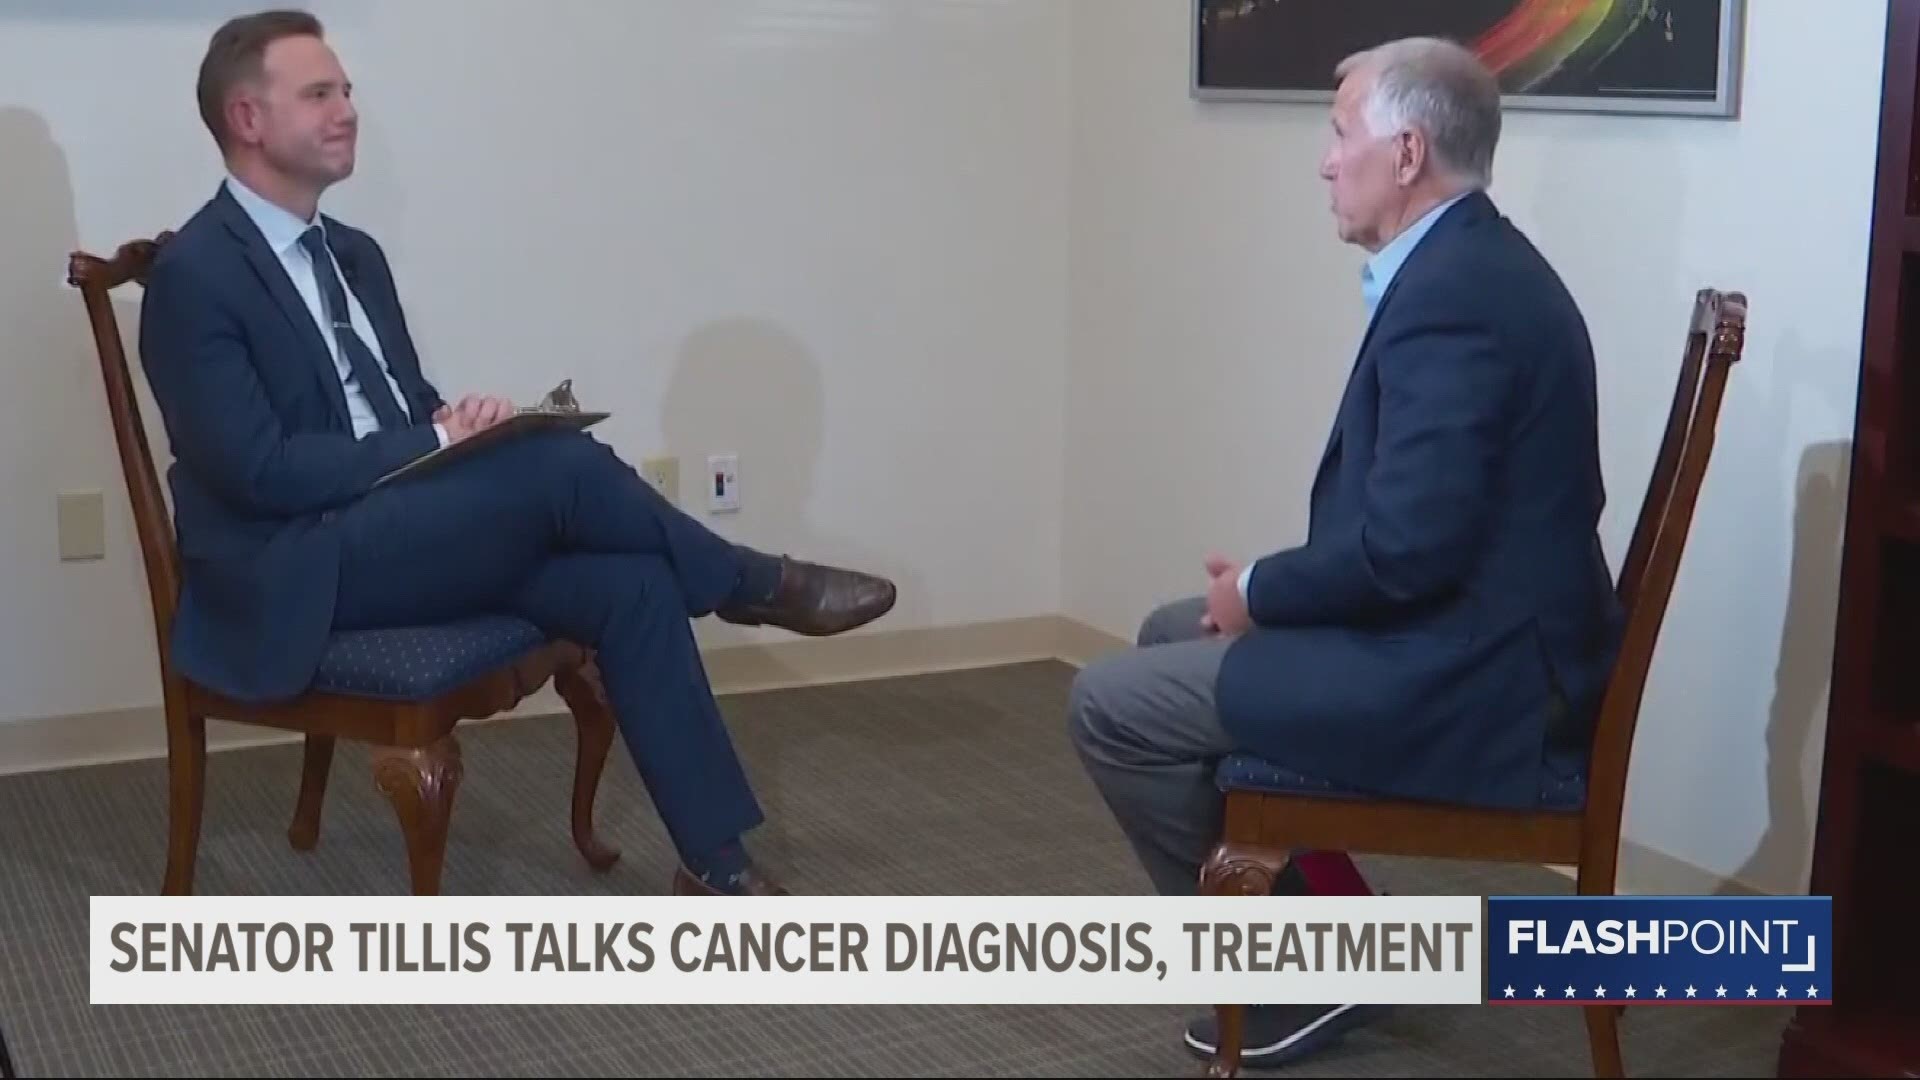 Ben Thompson talks exclusively with the senator from North Carolina about a recent prostate cancer diagnosis and what's next on the road to recovery.